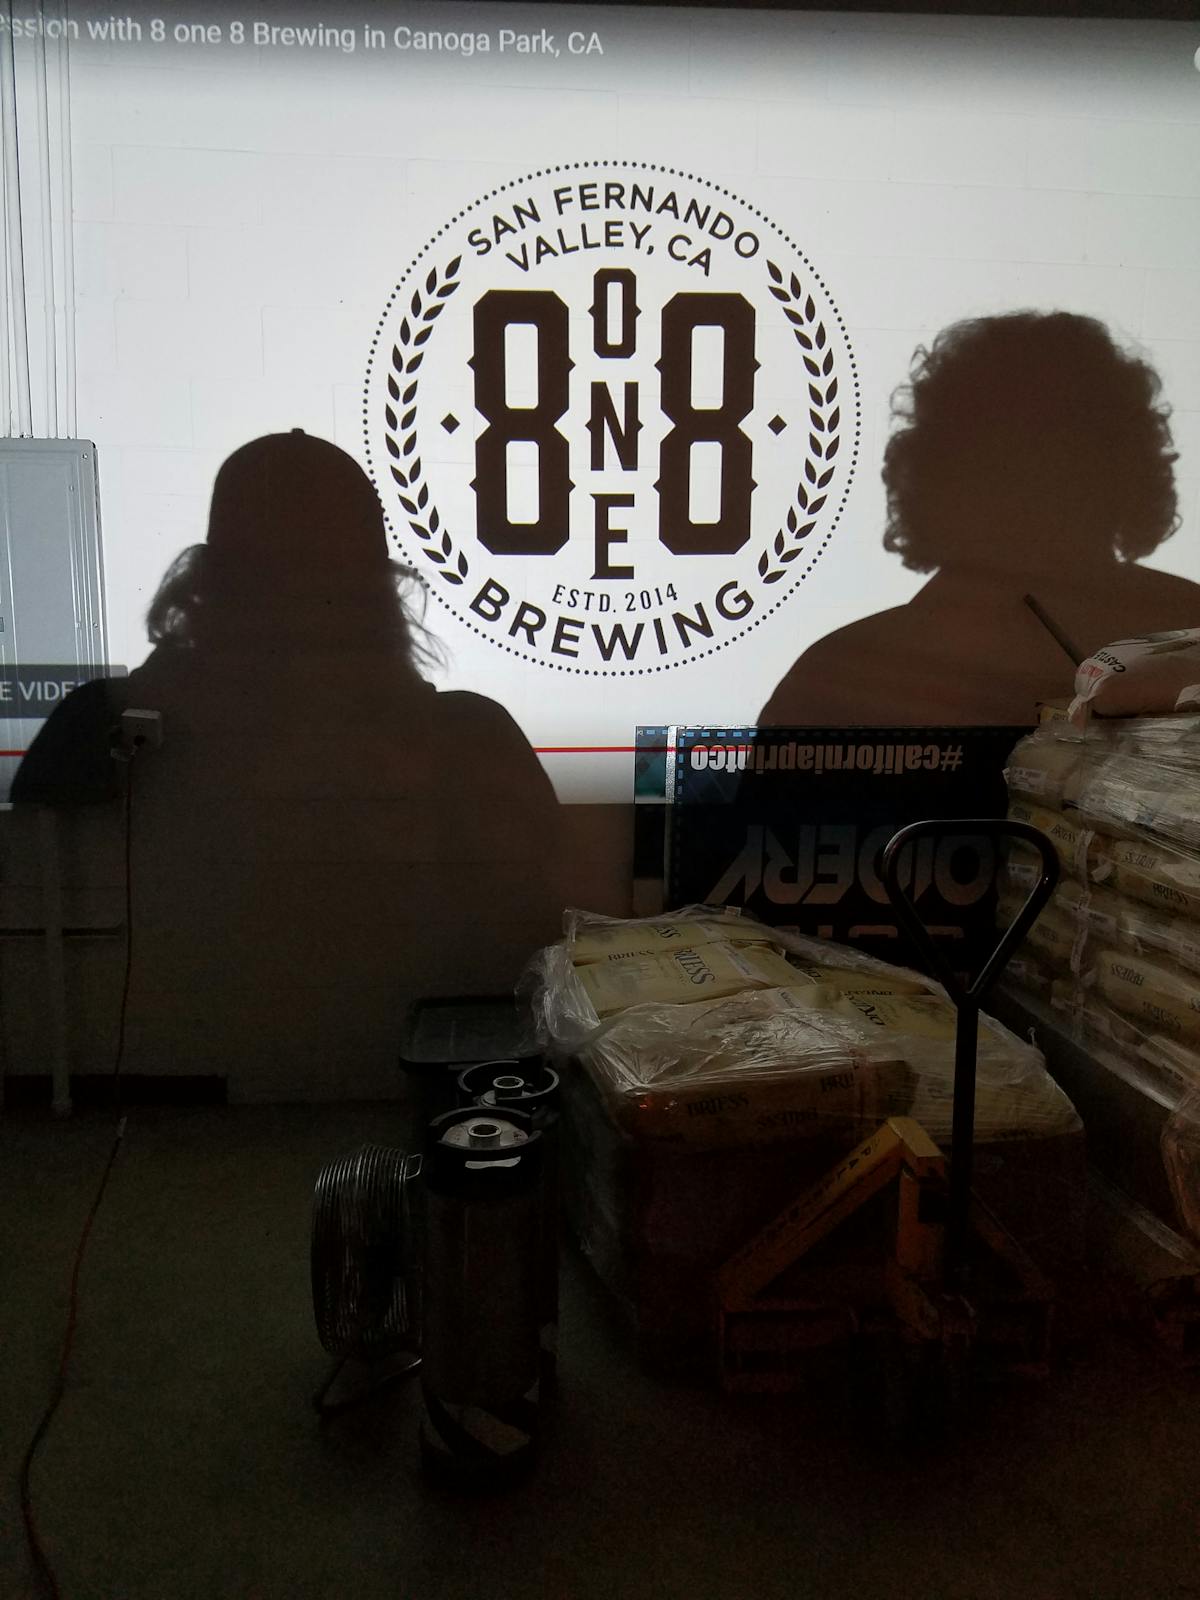 8one8 Brewing started by Derrick Olson and Bryan Olson